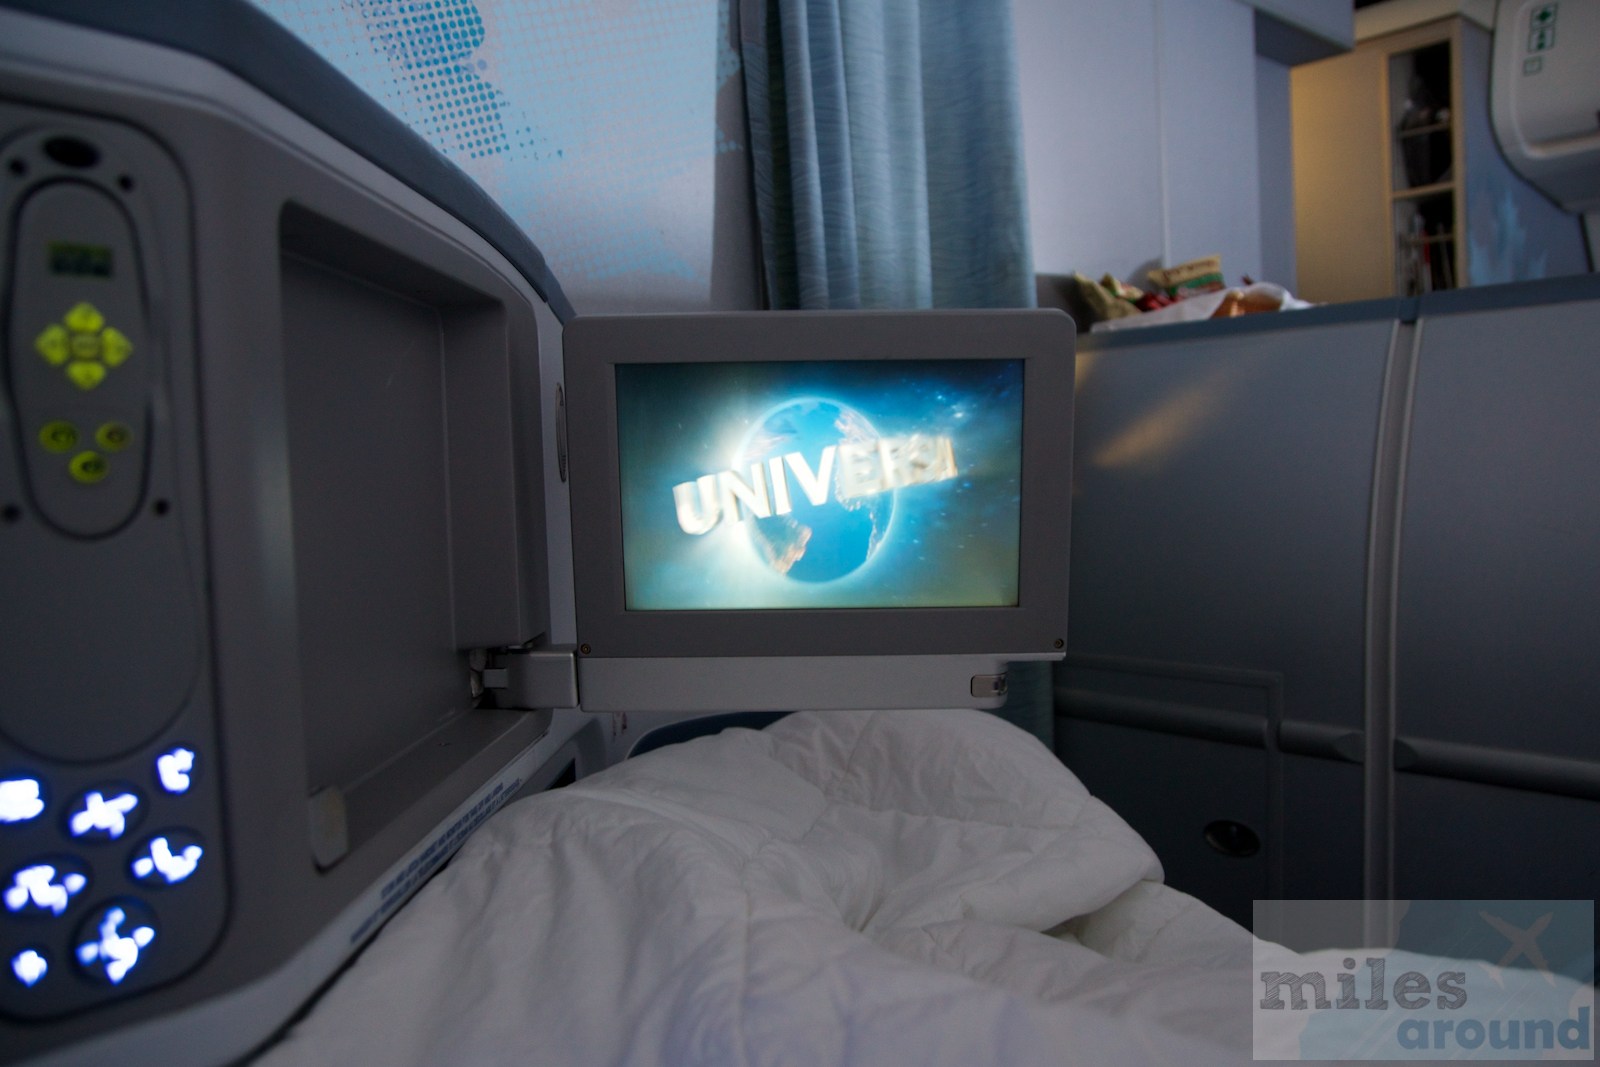 Air Canada Airbus A330 300 Business class cabin 12inc touchscreen IFE system @milesaround